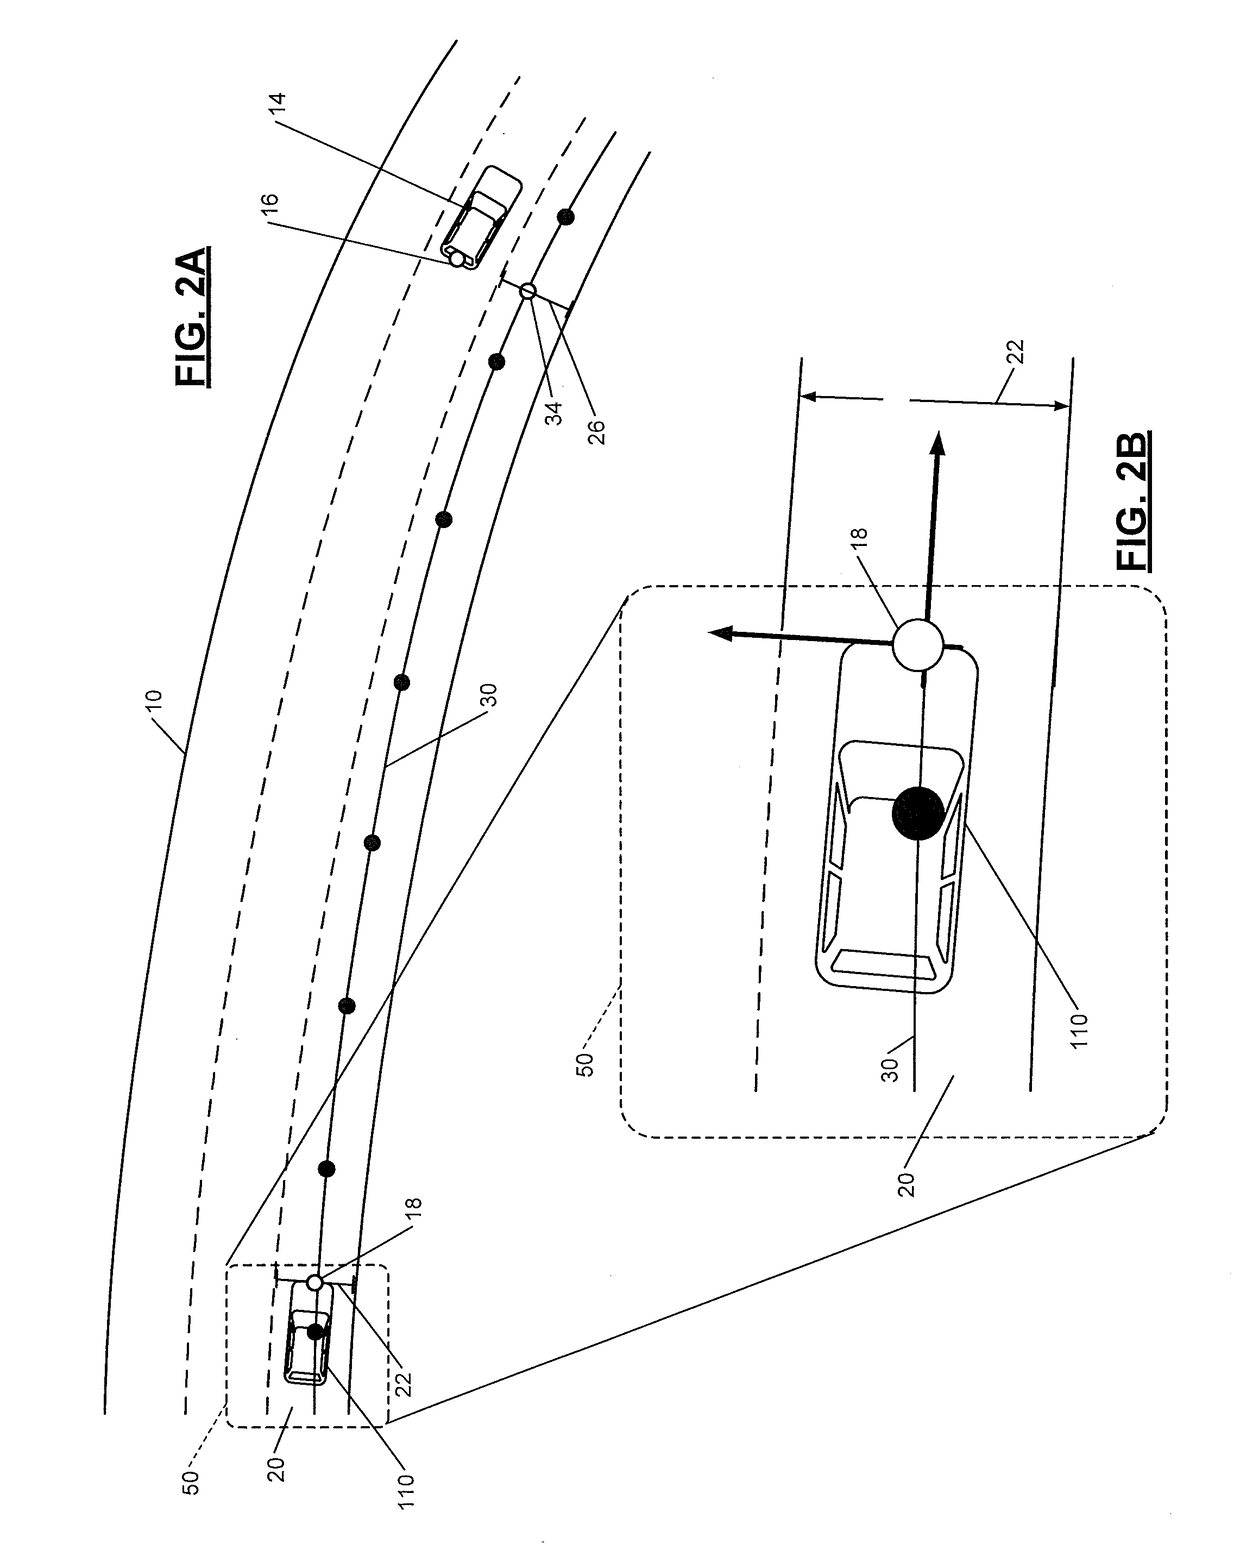 Systems and methods for providing relative lane assignment of objects at distances from the vehicle